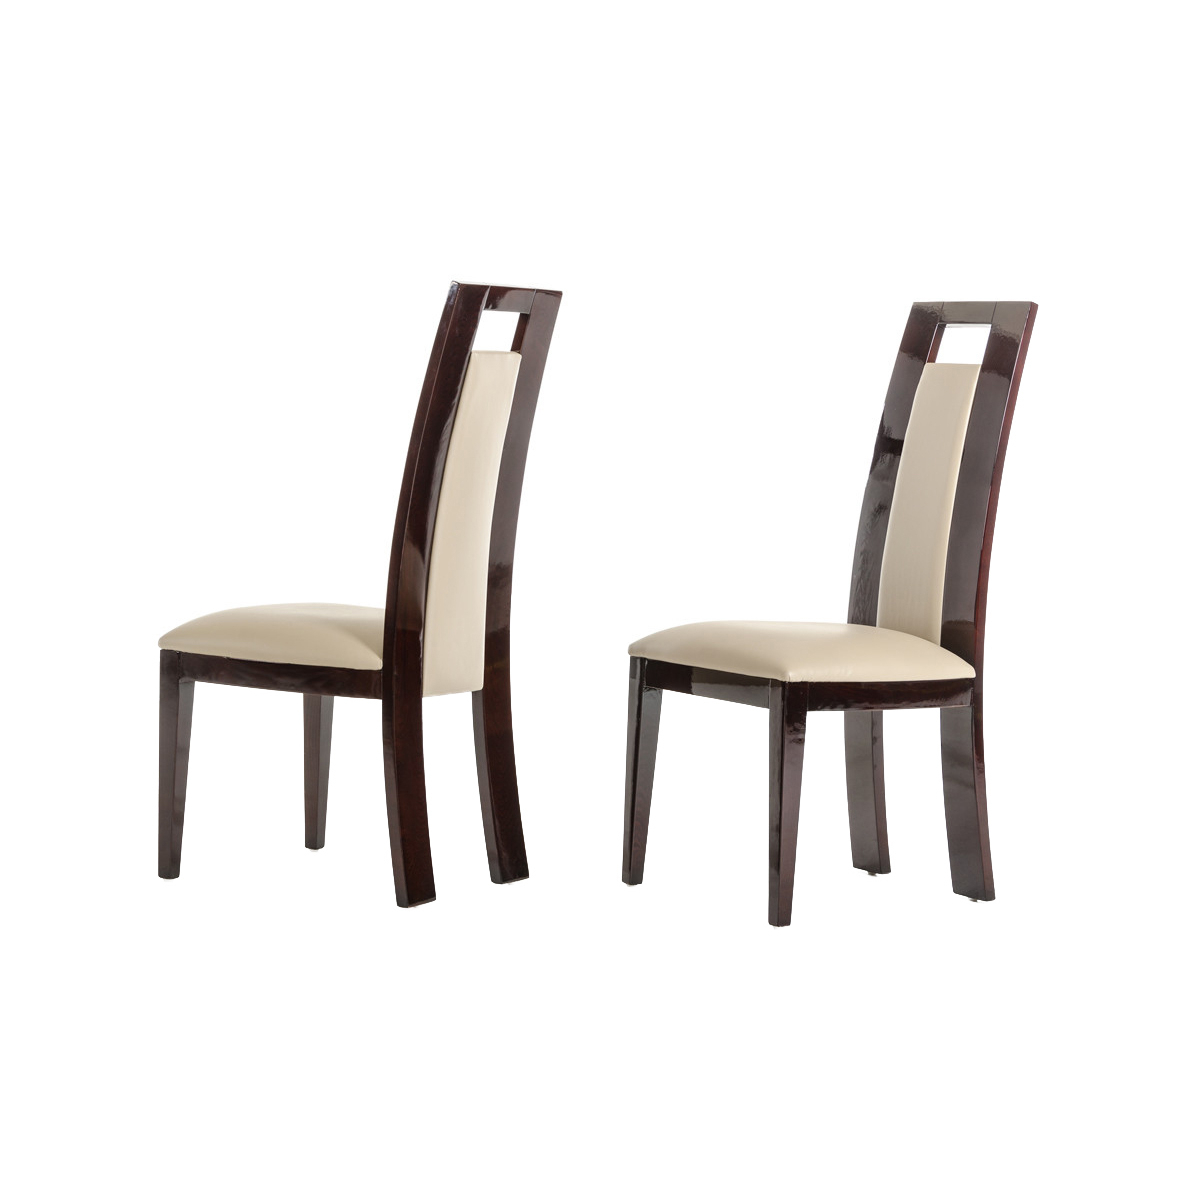 Leatherette Dining Chair With Sloped Backrest, Set Of 2, Beige And Brown- Saltoro Sherpi